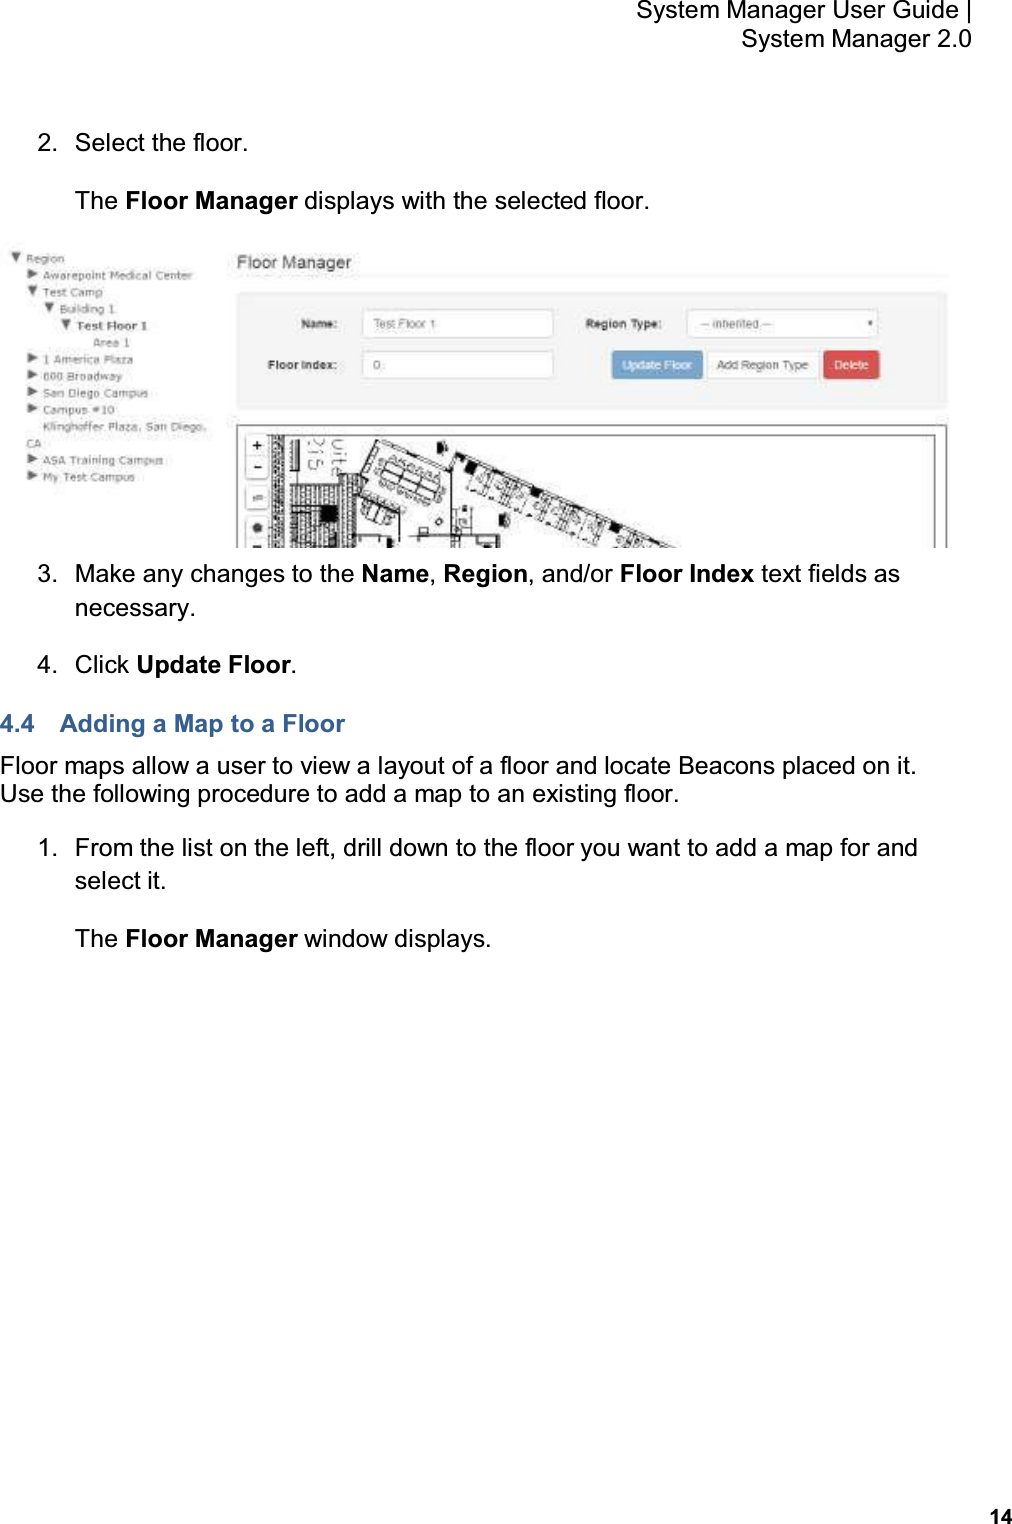           14 System Manager User Guide |  System Manager 2.0 2.  Select the floor. The Floor Manager displays with the selected floor.  3.  Make any changes to the Name, Region, and/or Floor Index text fields as necessary. 4.  Click Update Floor. 4.4  Adding a Map to a Floor Floor maps allow a user to view a layout of a floor and locate Beacons placed on it.  Use the following procedure to add a map to an existing floor. 1.  From the list on the left, drill down to the floor you want to add a map for and select it. The Floor Manager window displays. 